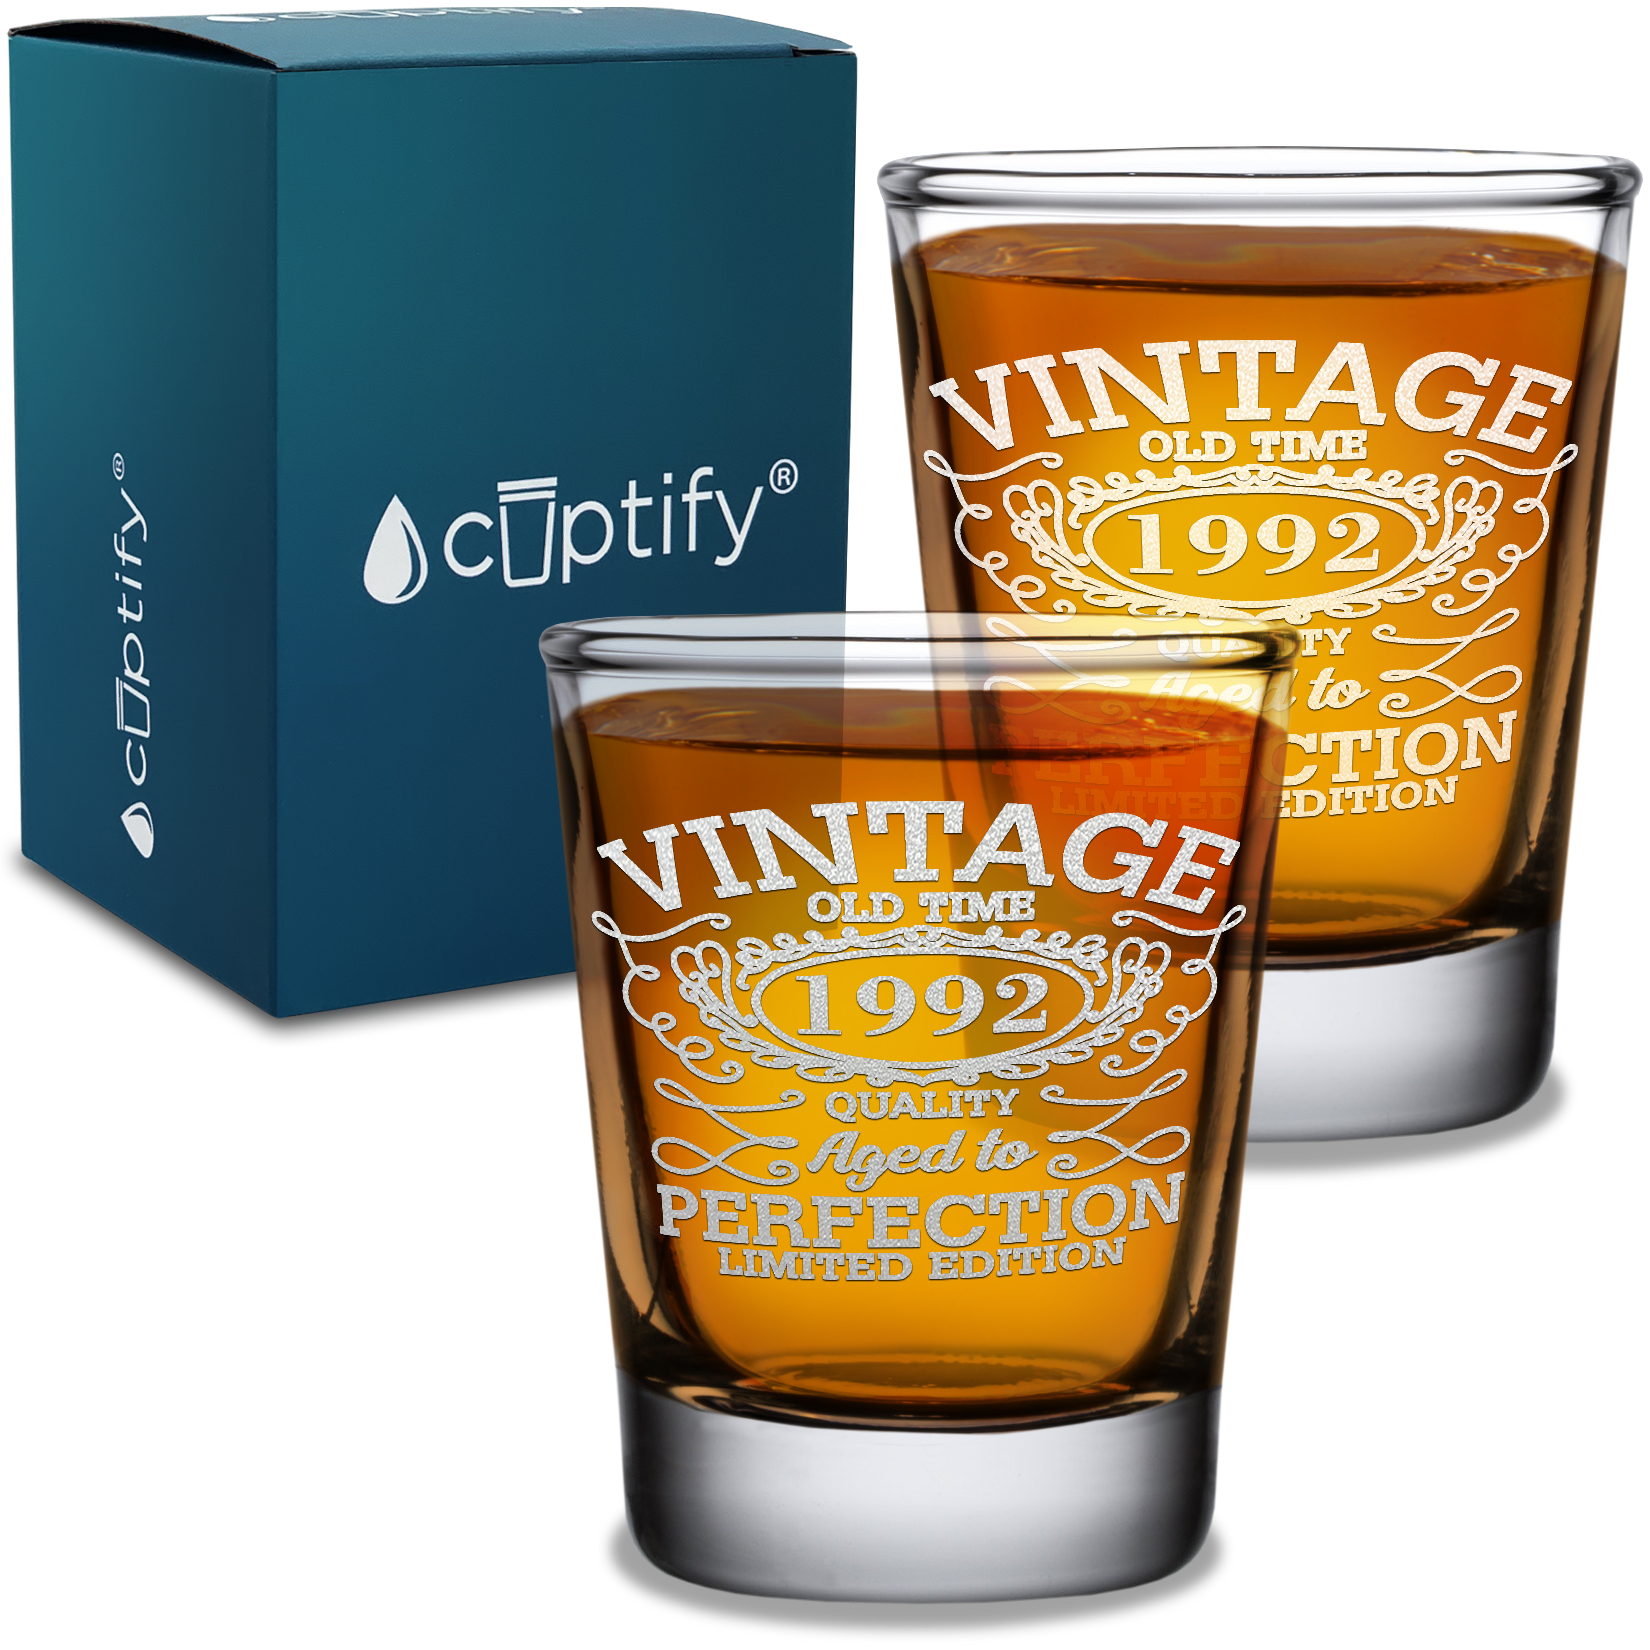 29th Birthday Vintage 29 Years Old Time 1992 Quality Laser Engraved 2oz Shot Glasses - Set of 2